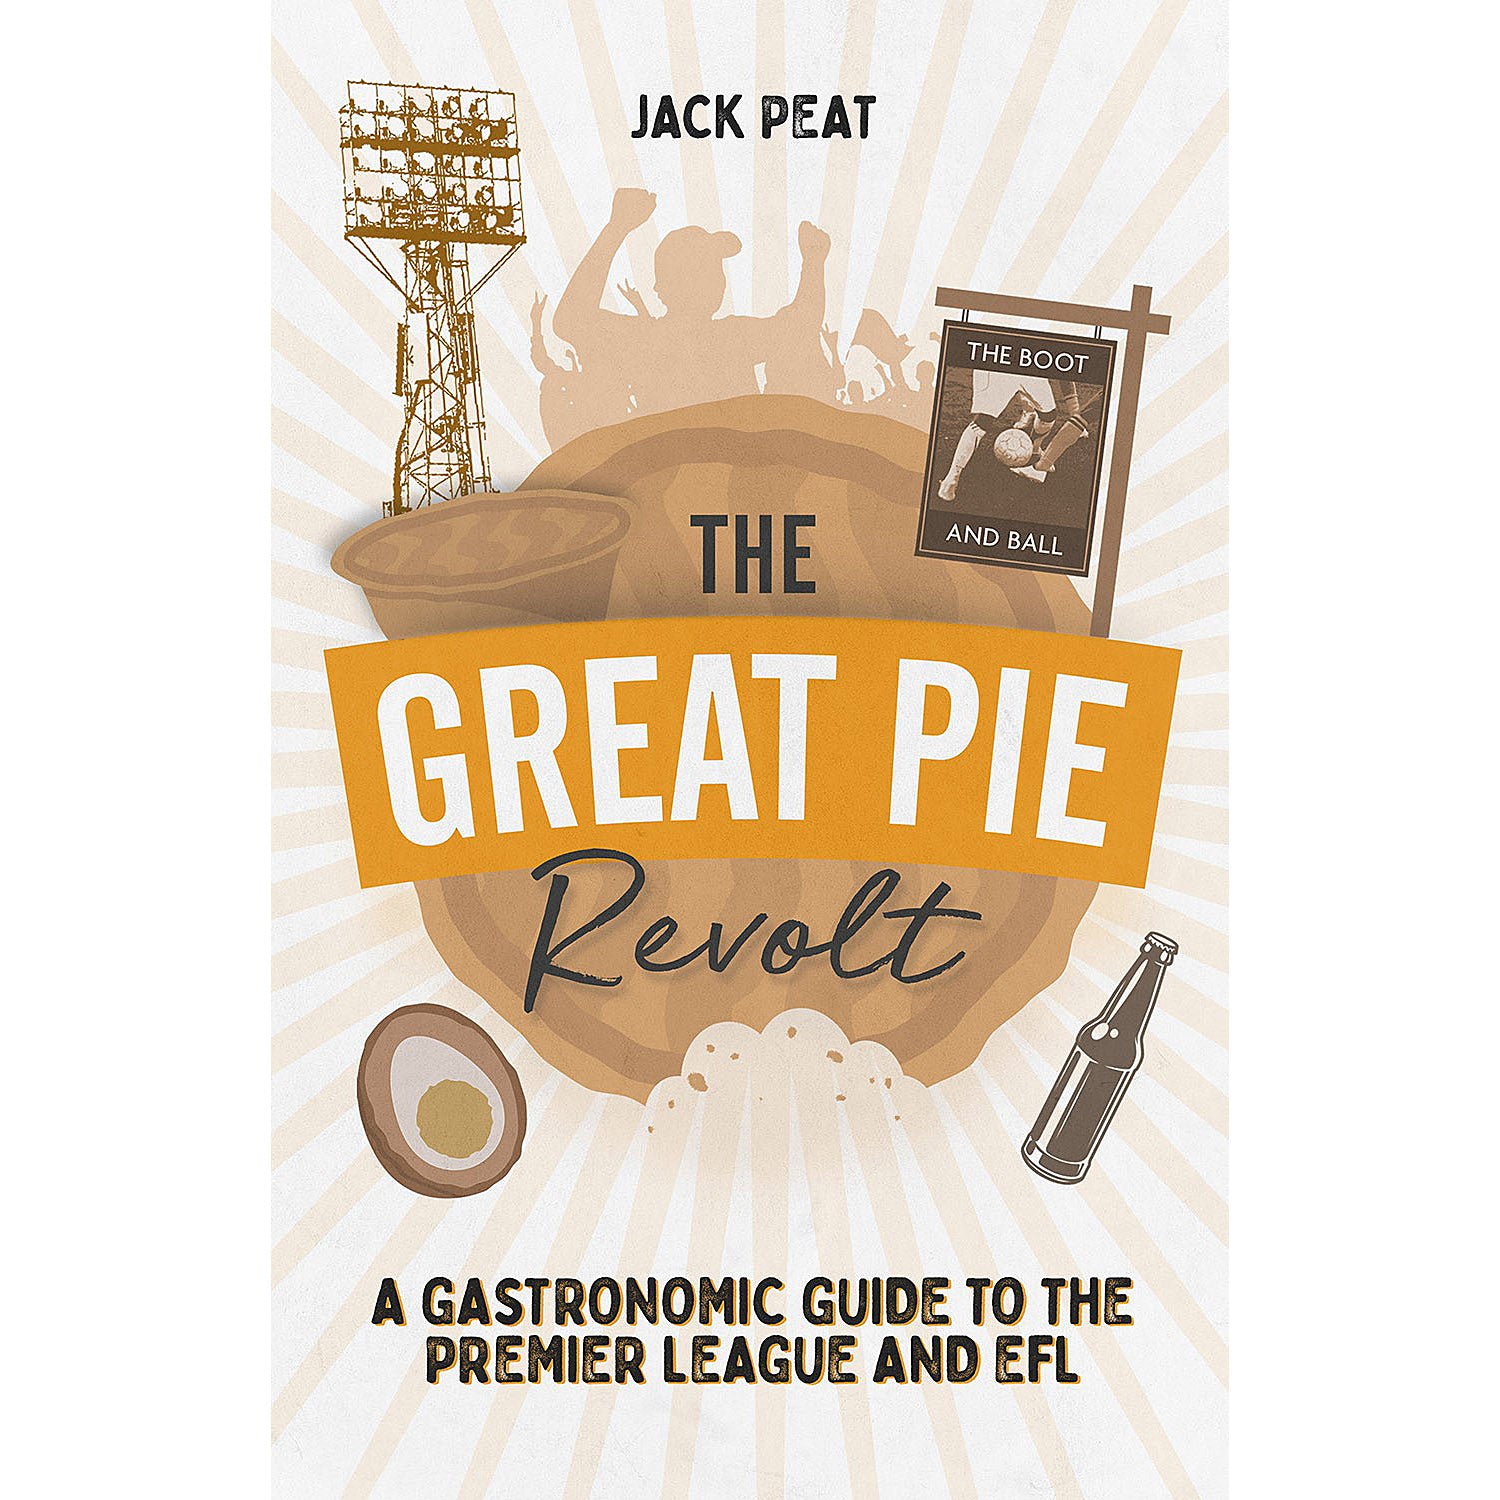 The Great Pie Revolt – A Gastronomic Guide to the Premier League and EFL